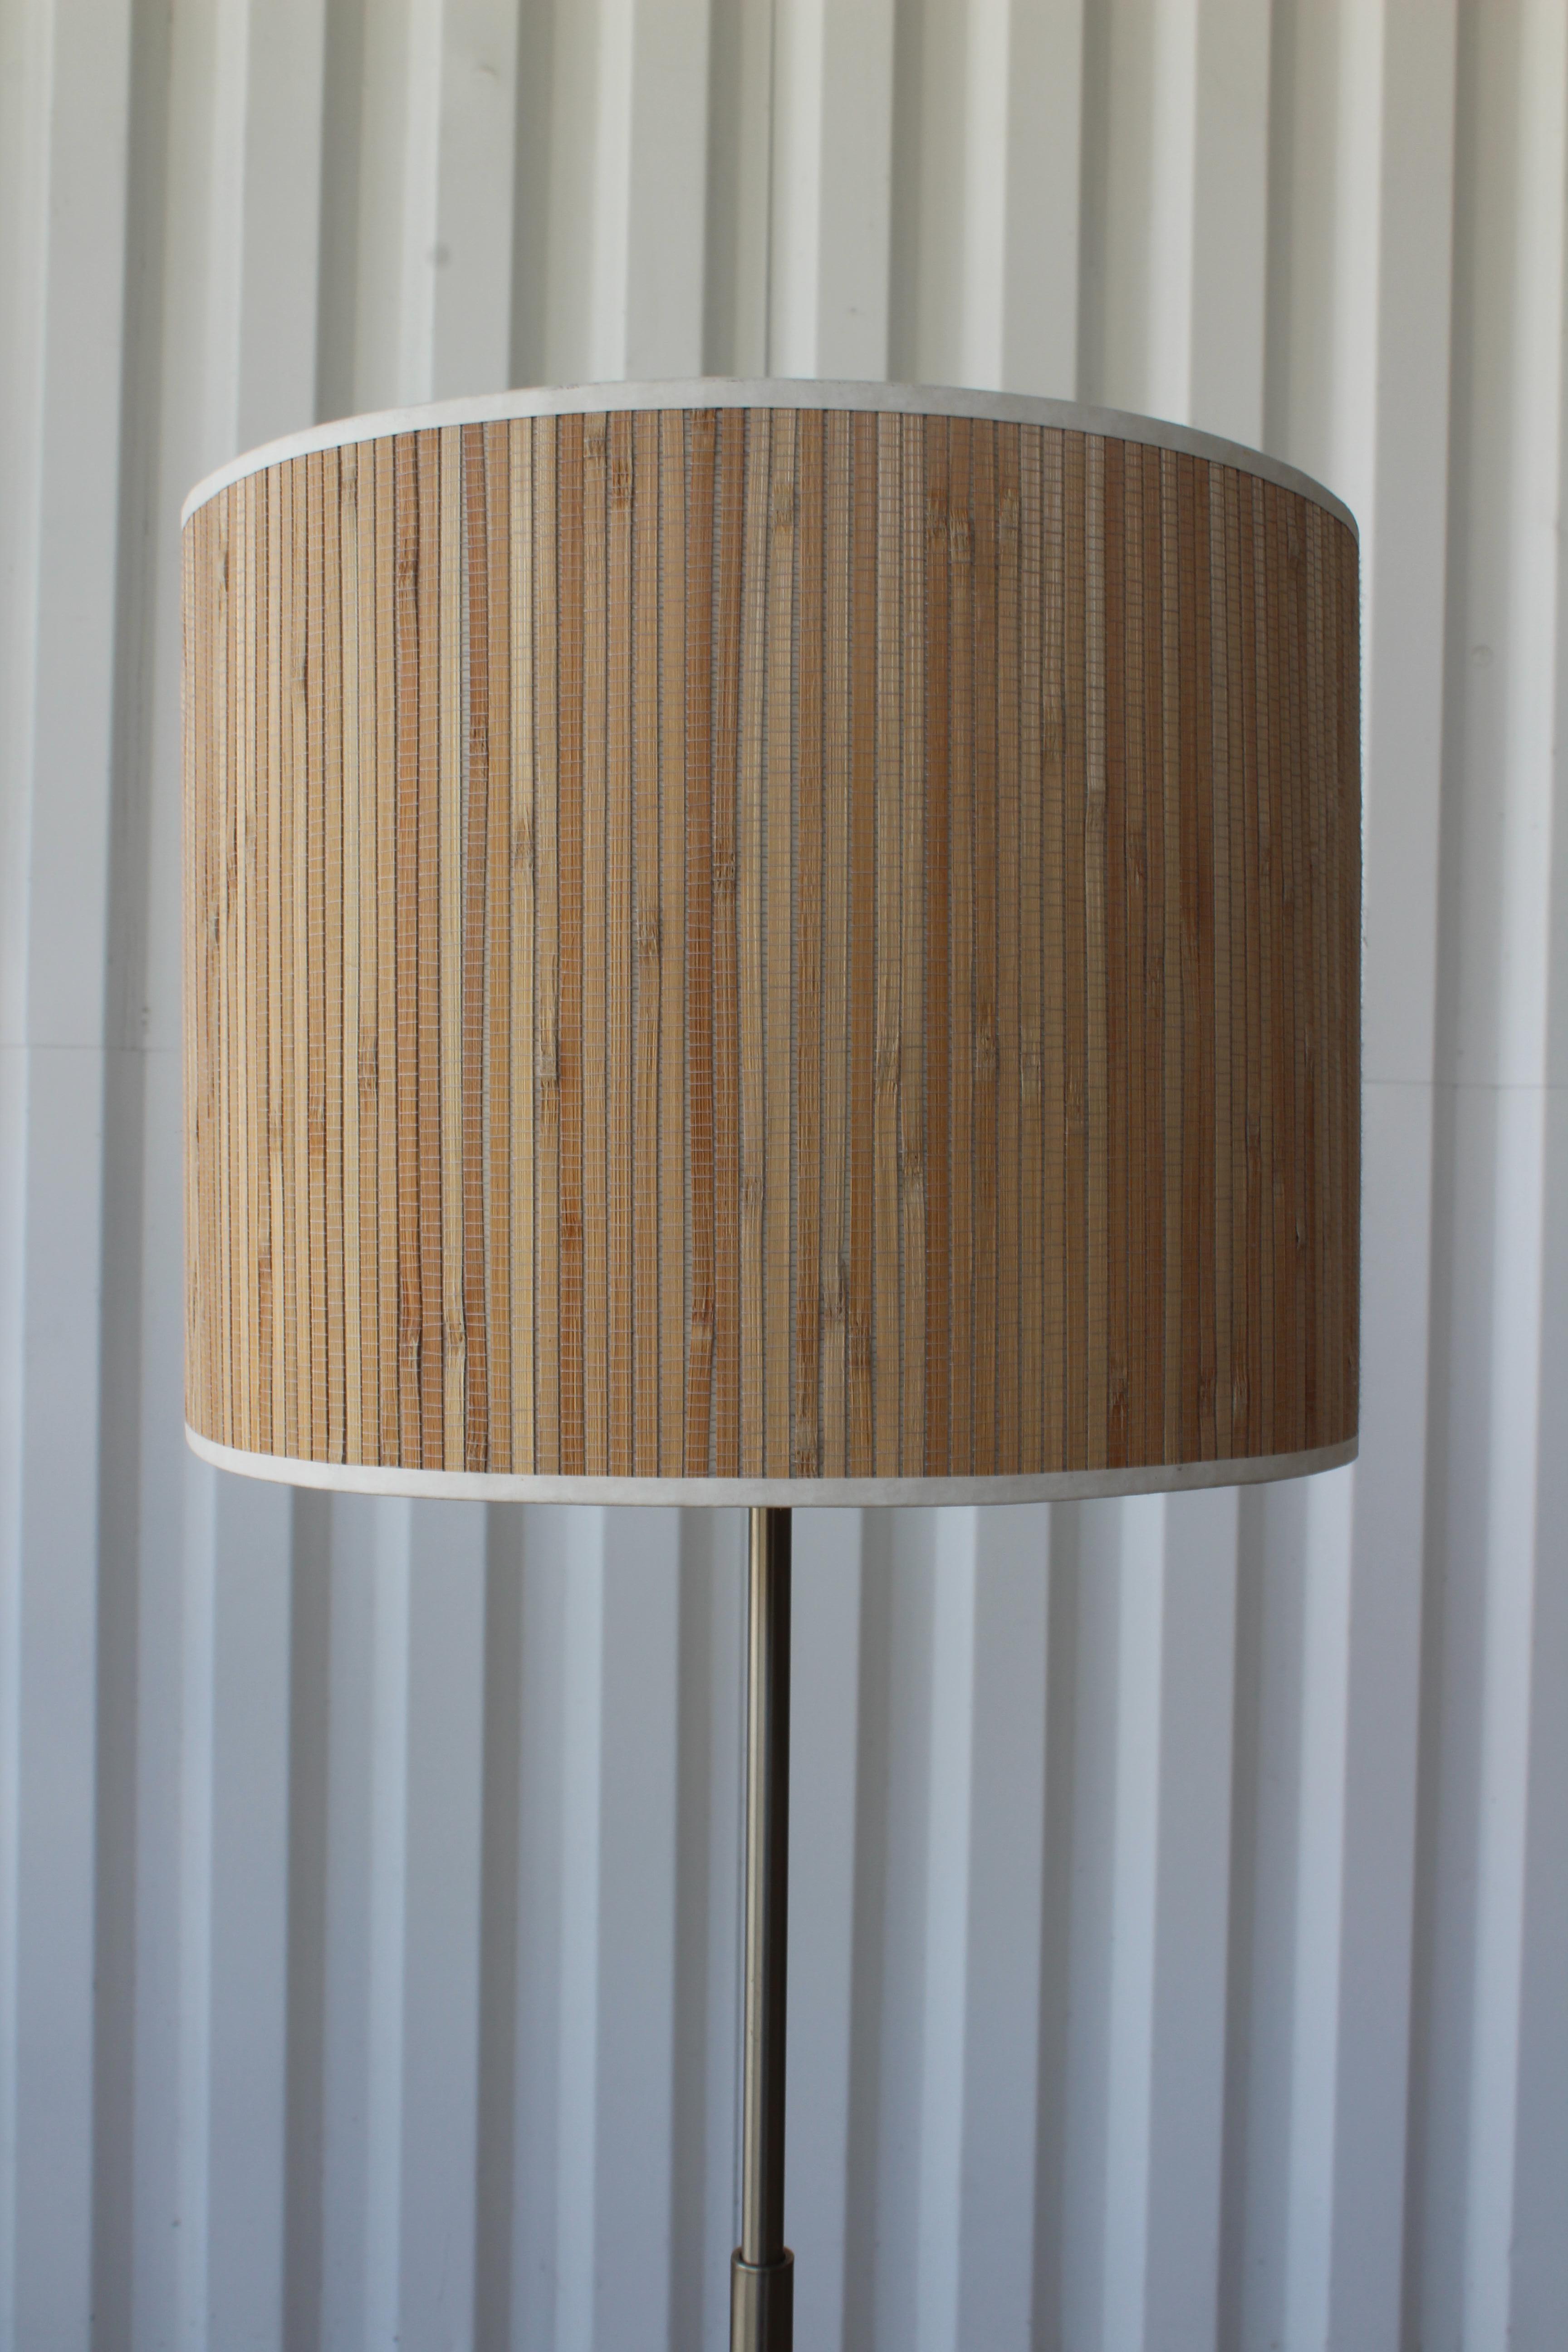 American Adjustable Floor Lamp by Laurel, U.S.A, 1960s. One Available.